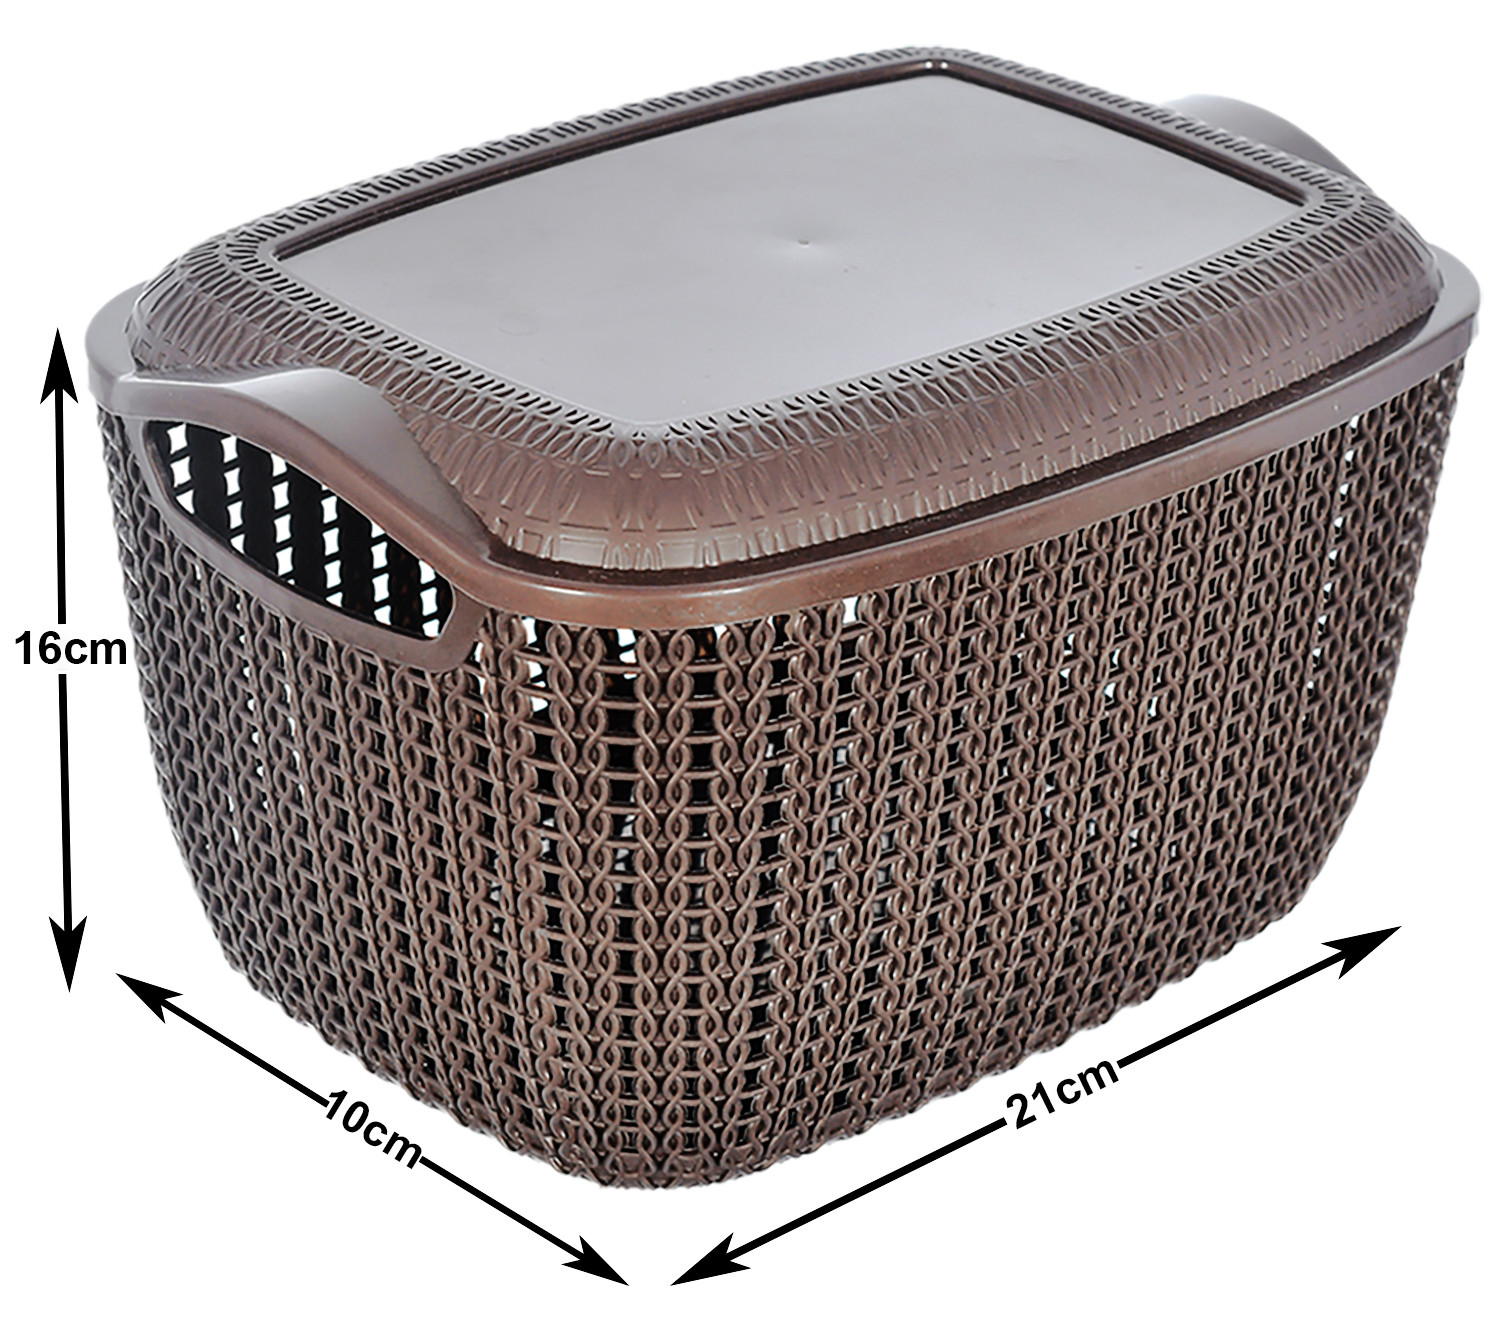 Kuber Industries Multiuses Small M 25 Plastic Basket/Organizer With Lid-(Brown) -46KM037